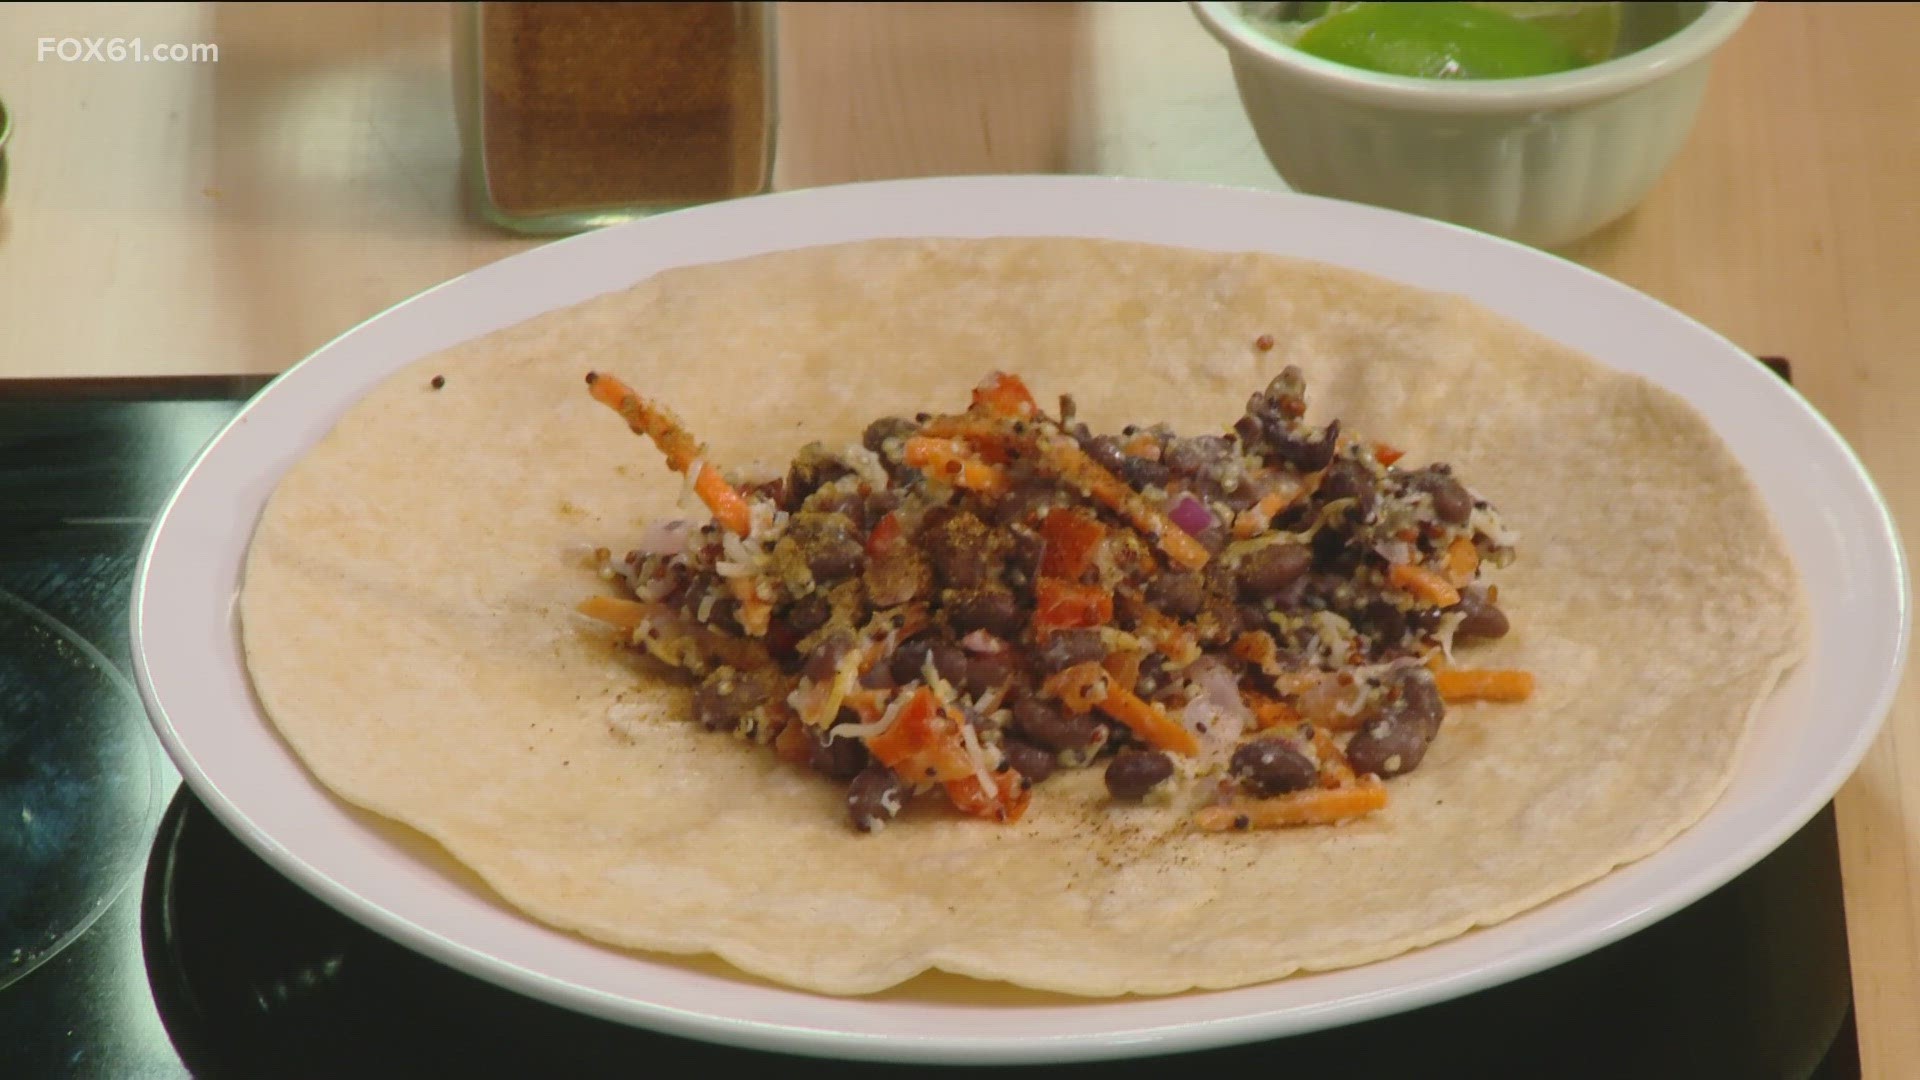 Take a look at how the black bean & quinoa fiesta wrap is made for the students at Waterbury Public Schools.